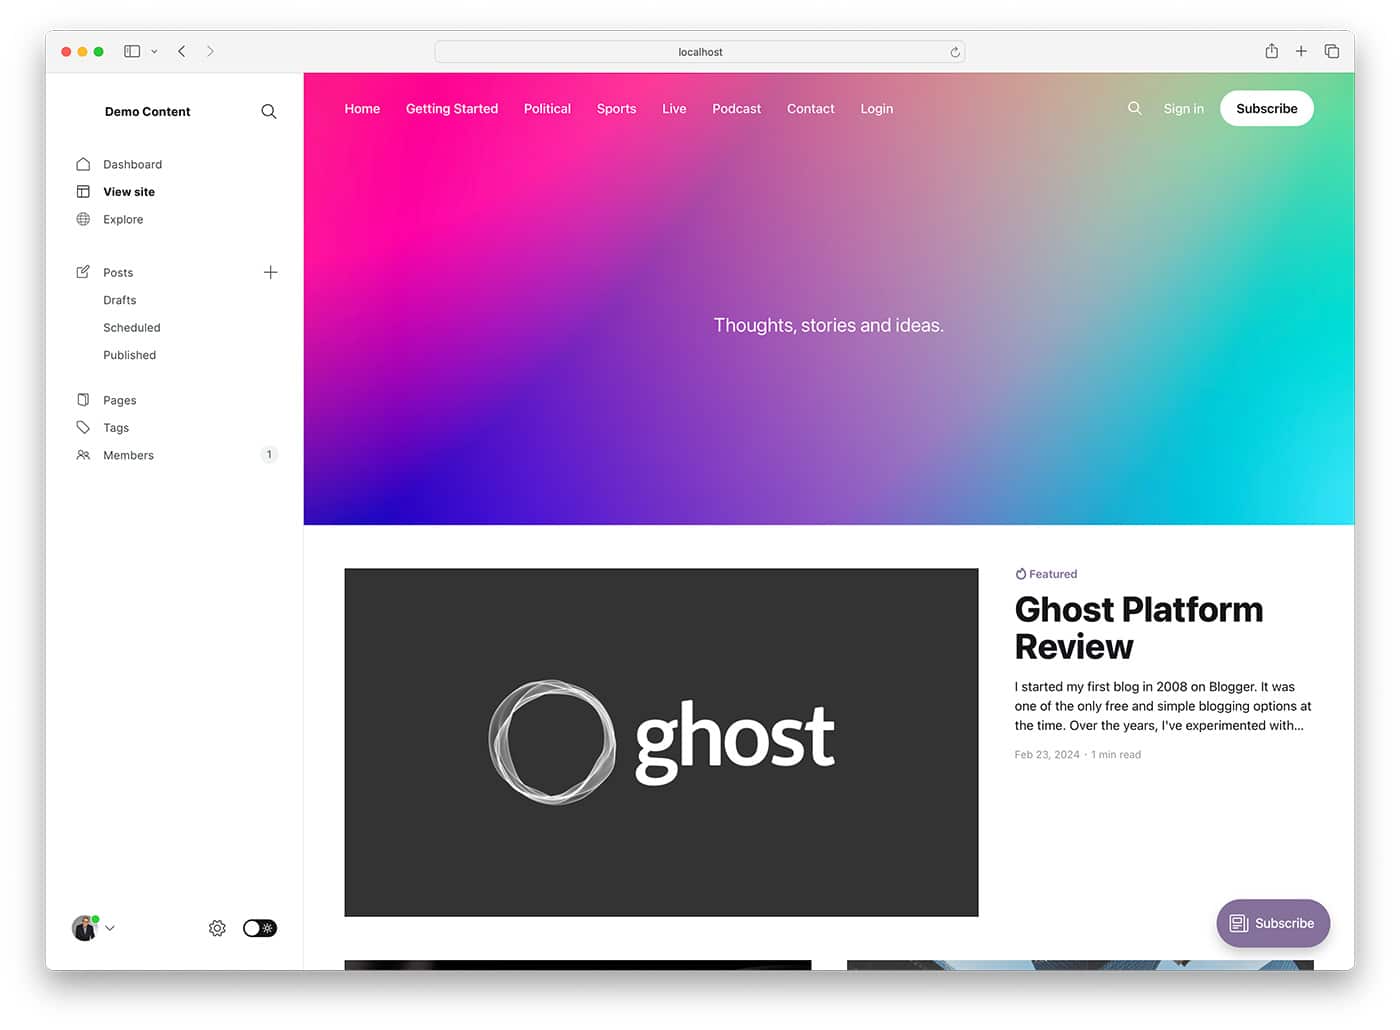 Access your self-hosted ghost website for the first time